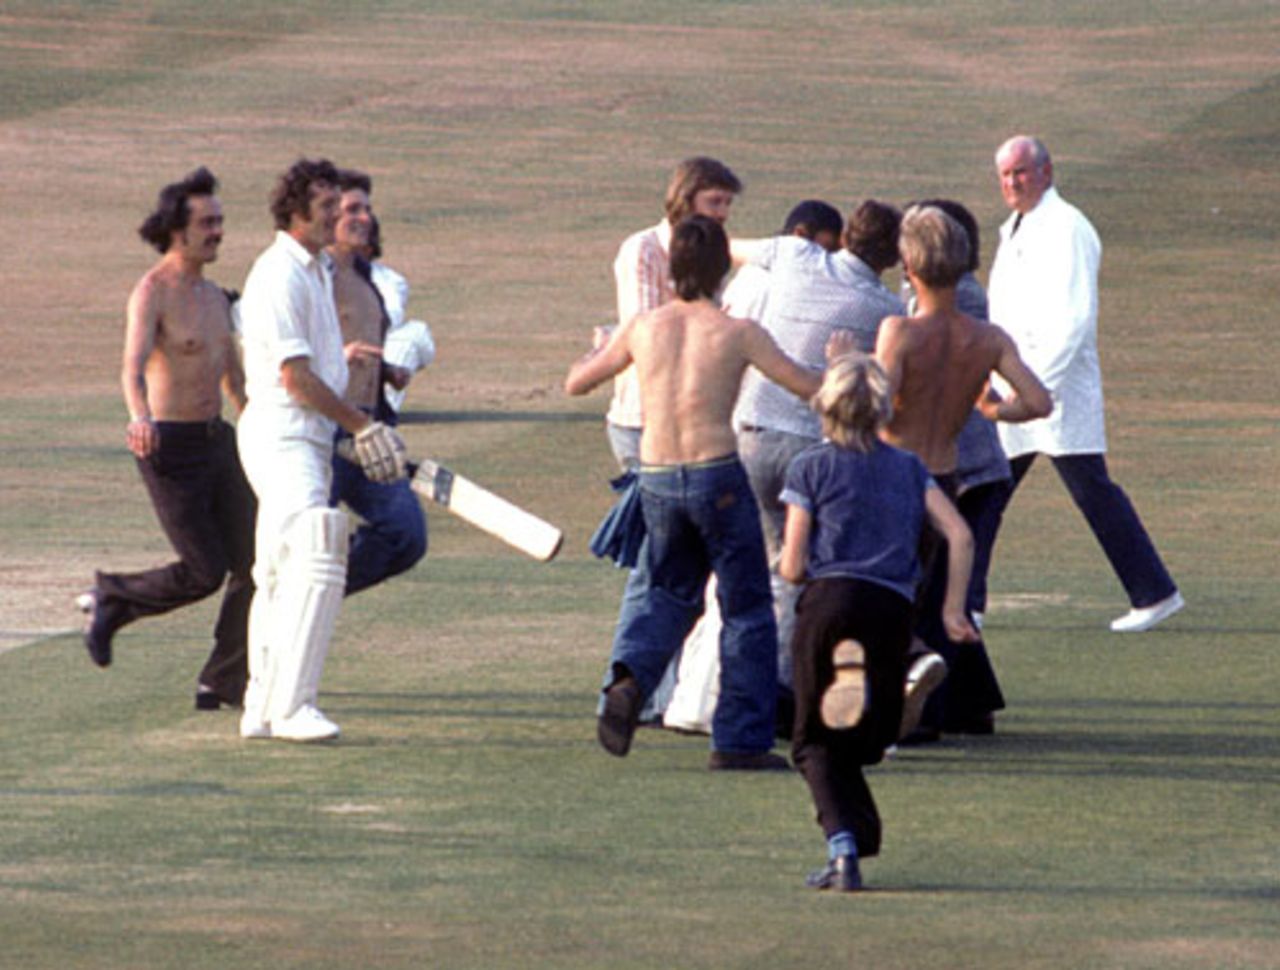 Geoff Boycott is mobbed by fans after making his 100th first-class hundred, England v Australia, 4th Test, Headingley, August 11, 1977 